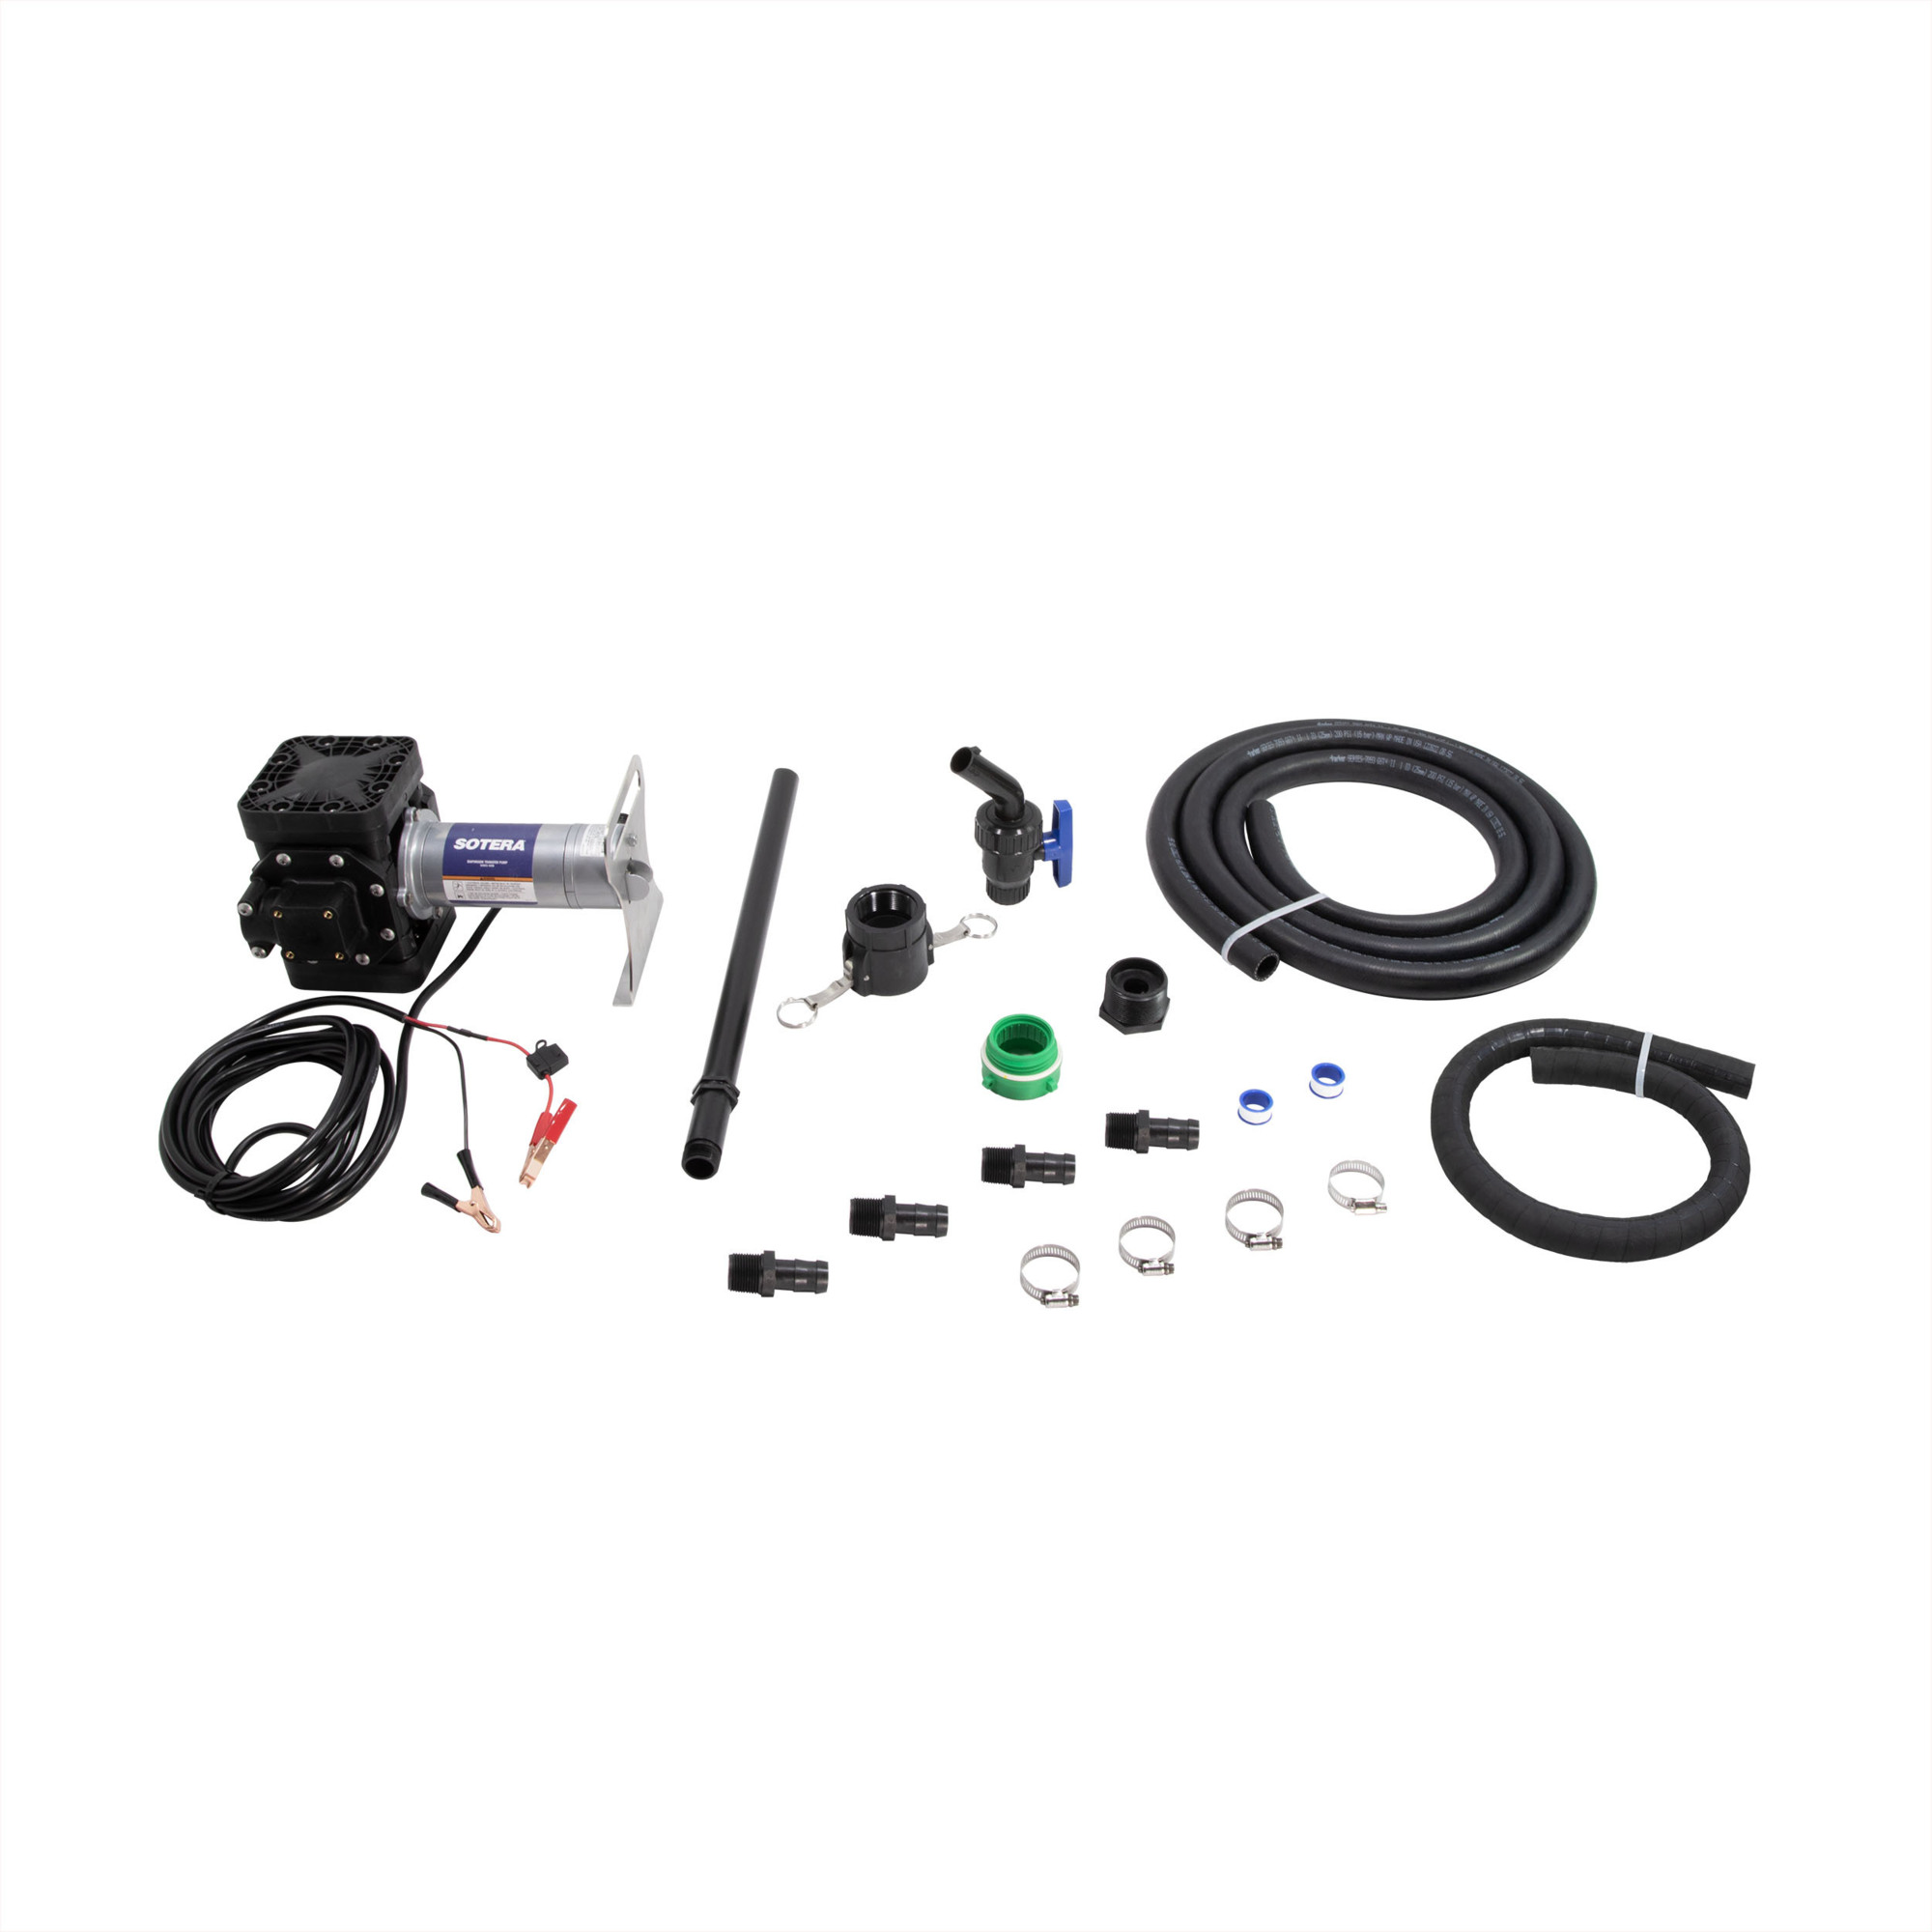 Sotera Systems Tote & Go Pumping Kit â 12VDC, Model SS415BX731PG